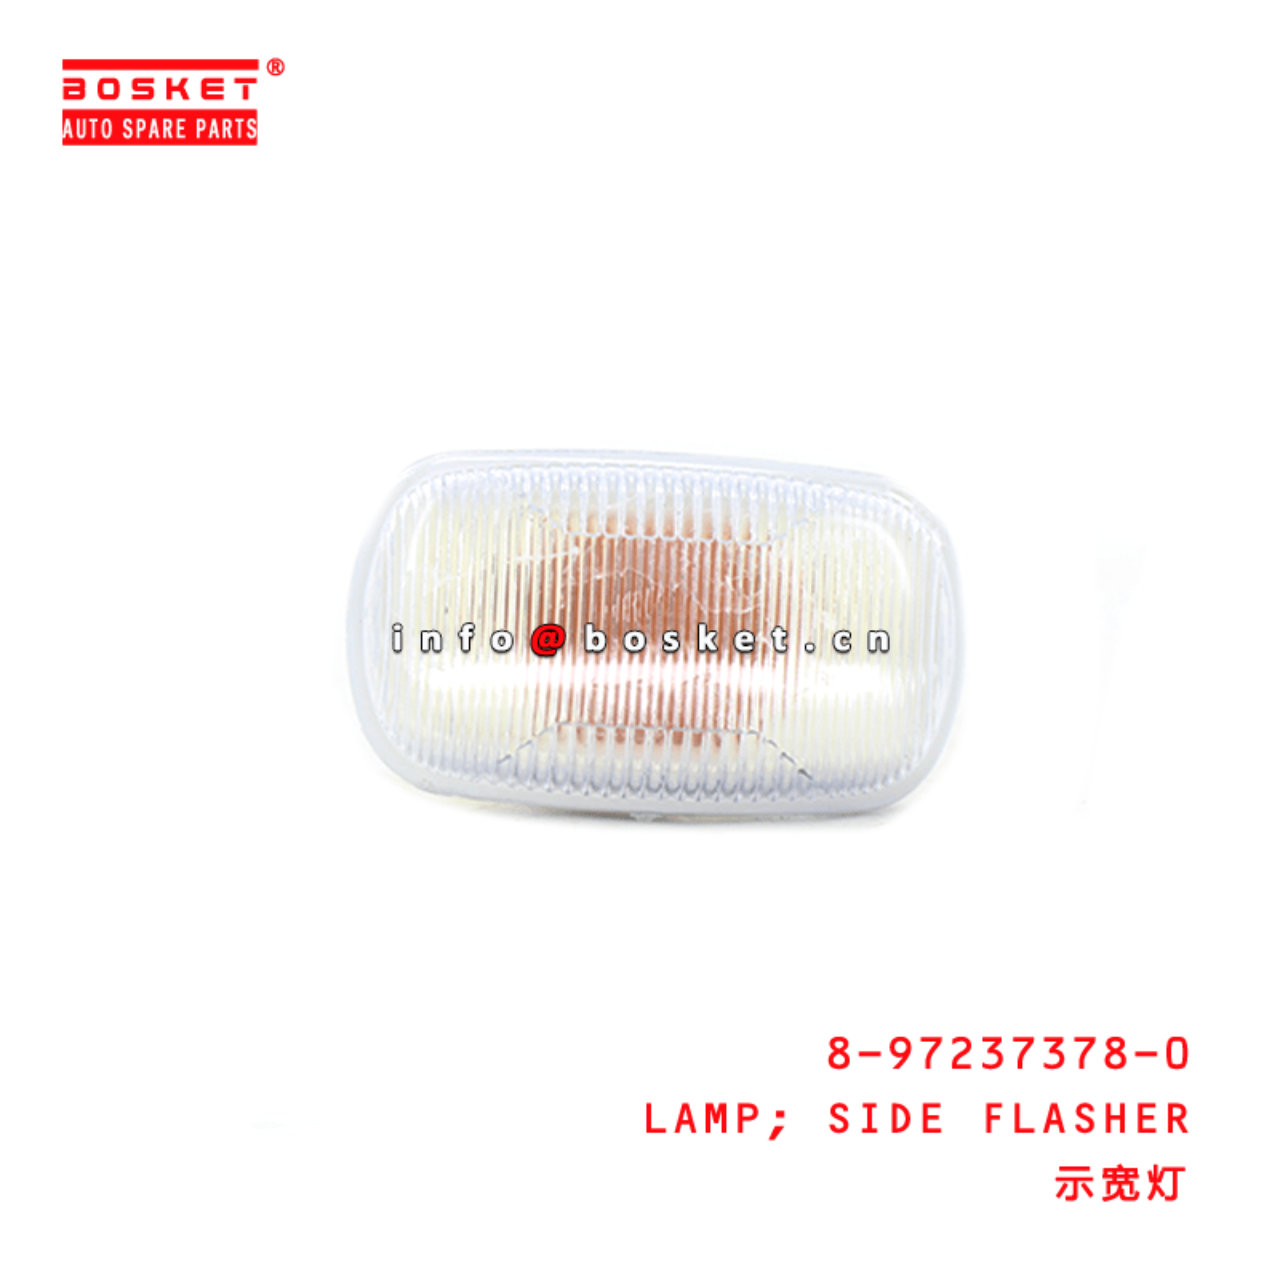 8-97237378-0 Side Flasher Lamp 8972373780 Suitable for ISUZU D-MAX